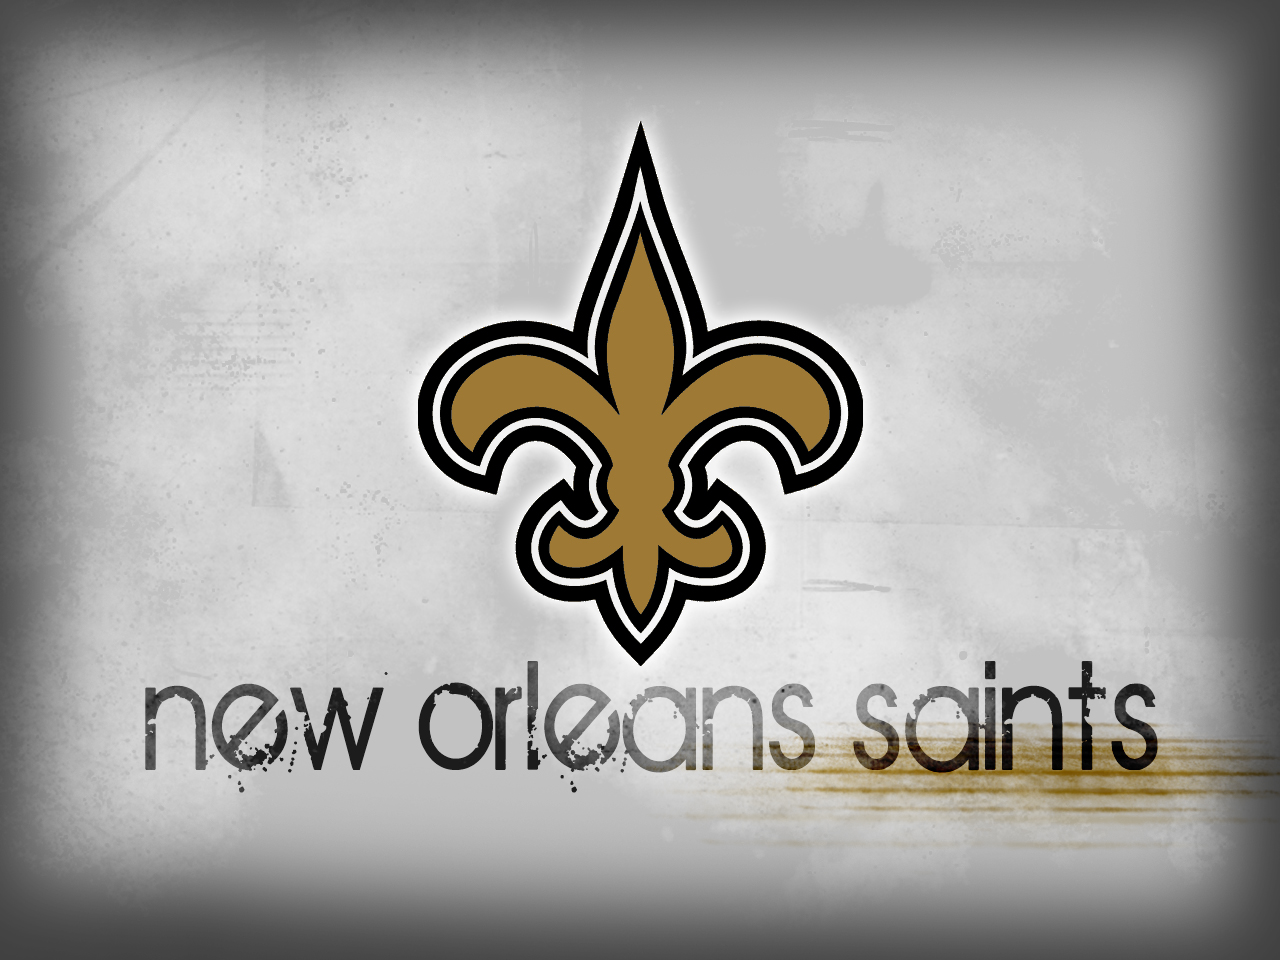 Hope you like this New Orleans Saints wallpaper background in high